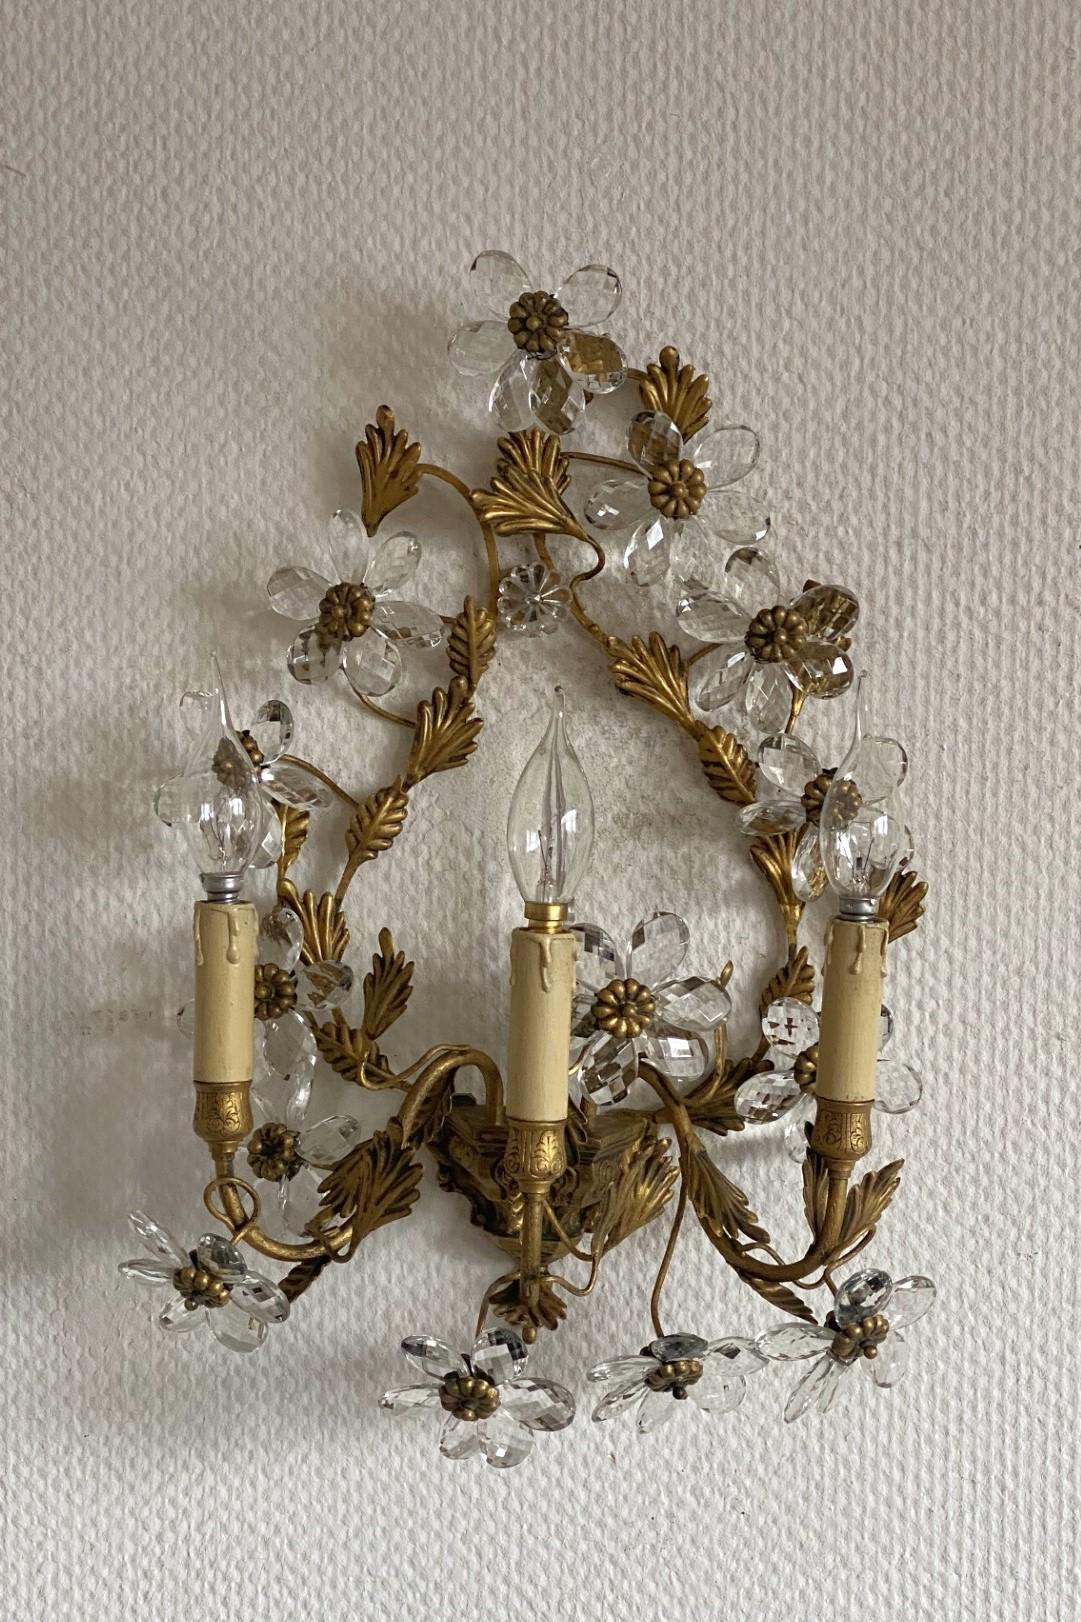 20th Century Pair of Large Maison Baguès Wrought Iron Crystal Flower Wall Sconces, 1930s For Sale